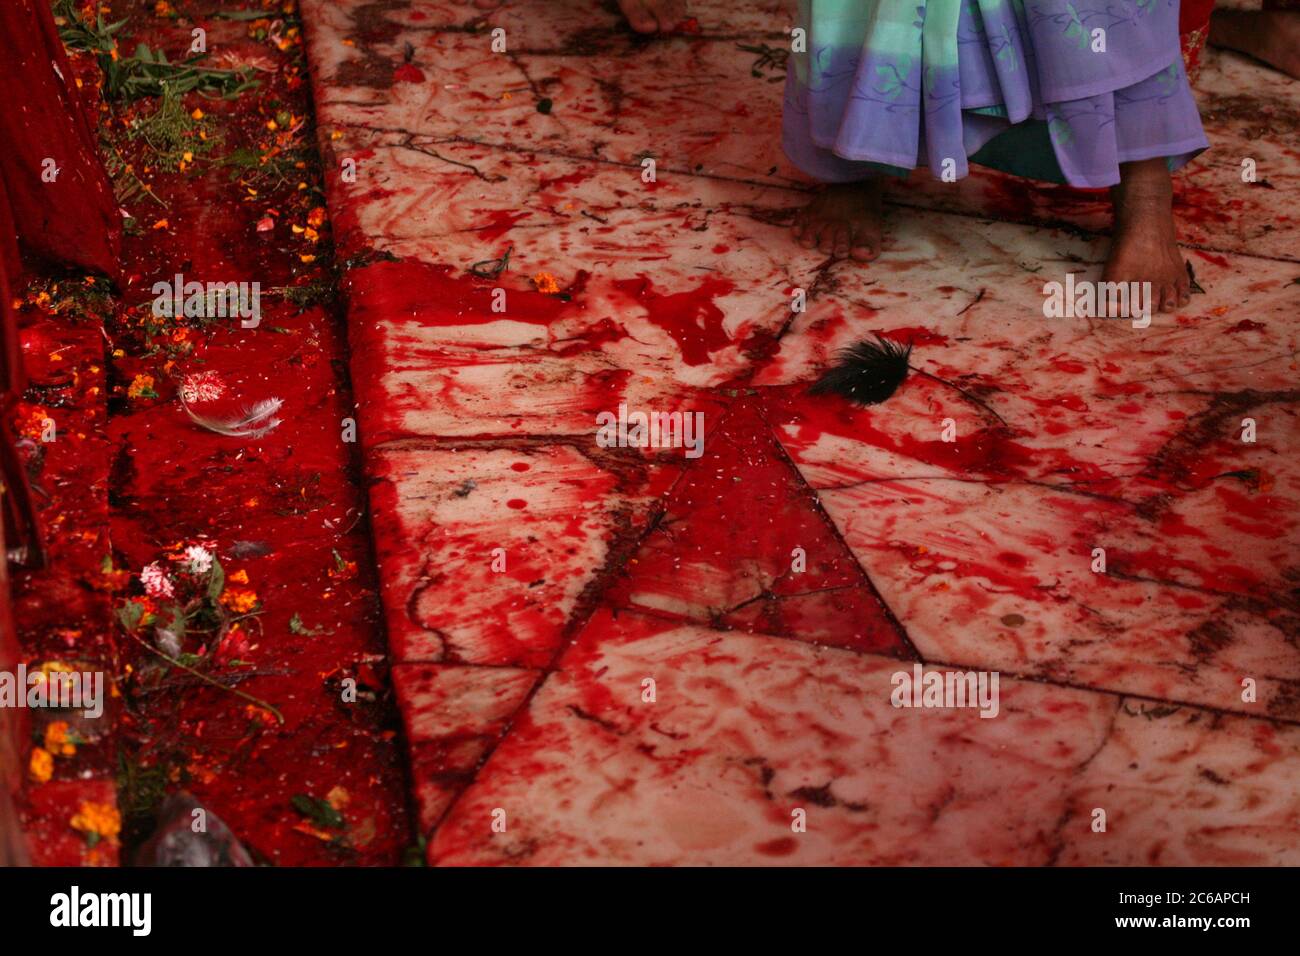 Barefooted woman wearing sari stands on the floor covered with fresh blood of just sacrificed animals in the main sanctuary in the Dakshinkali Temple near Kathmandu, Nepal. One of the major Hindu temples in Nepal dedicated to the goddess Kali is known for its animal sacrifices. Stock Photo